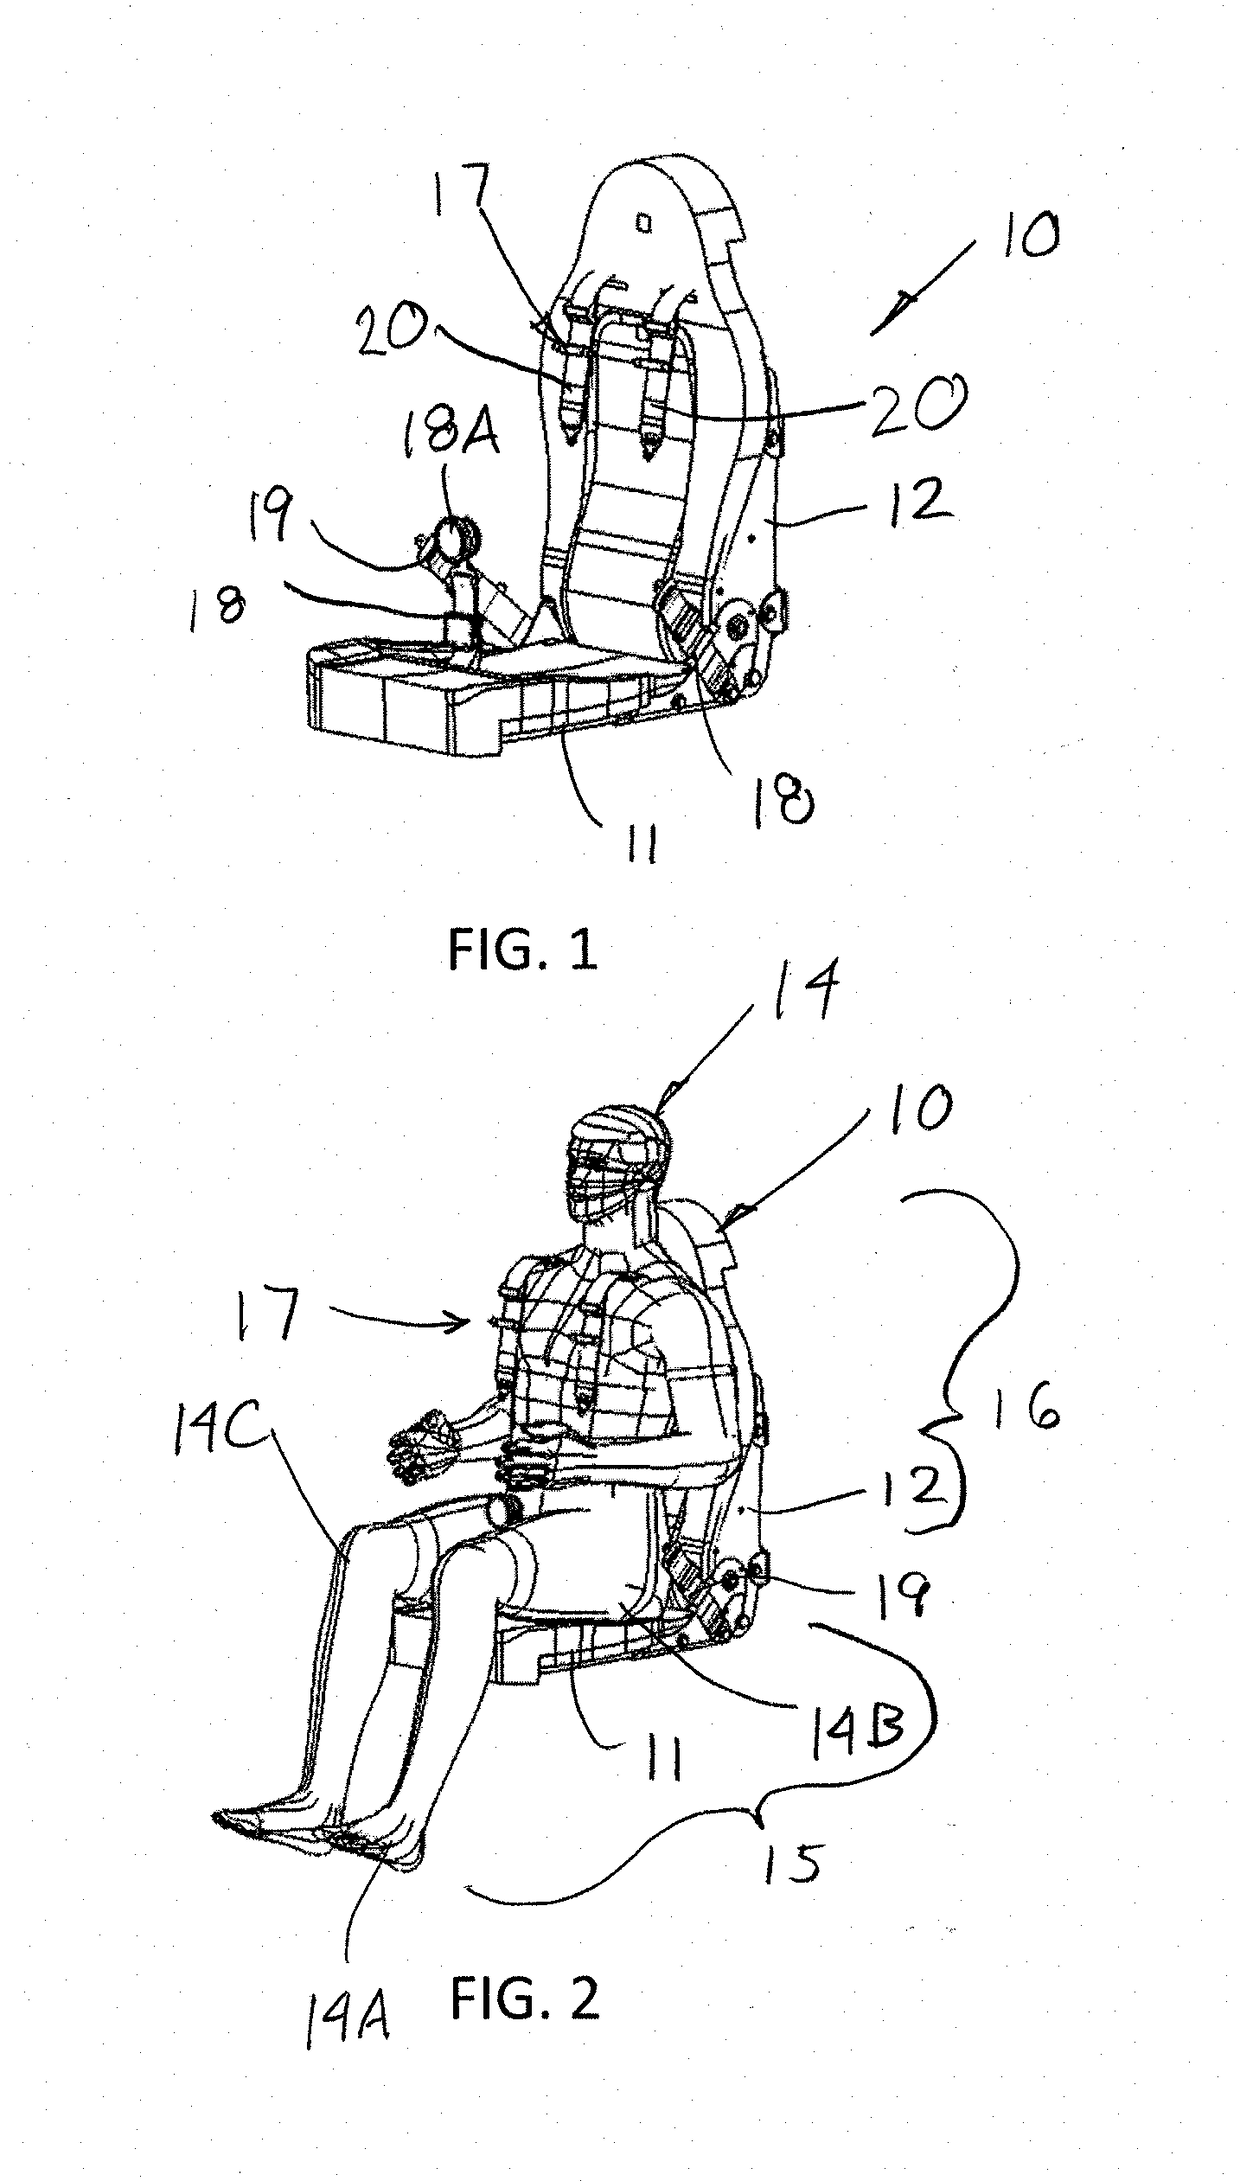 Torso Support System For Protecting Against Upward Accelerations In Vehicle Seats And Occupant Support Structures